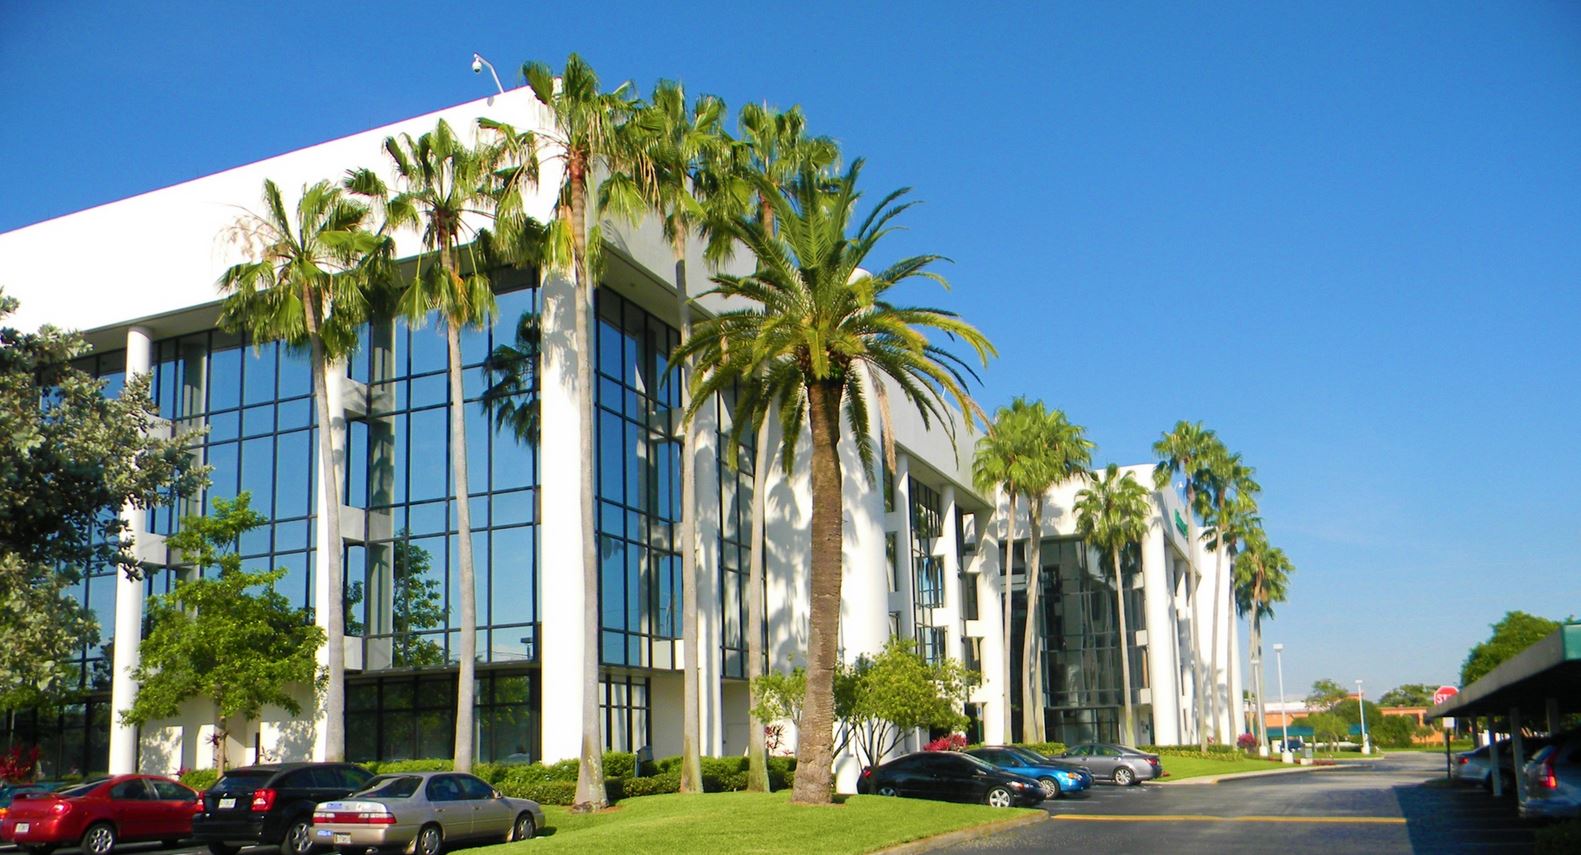 The offices at 2300 Glades Road in Boca Raton